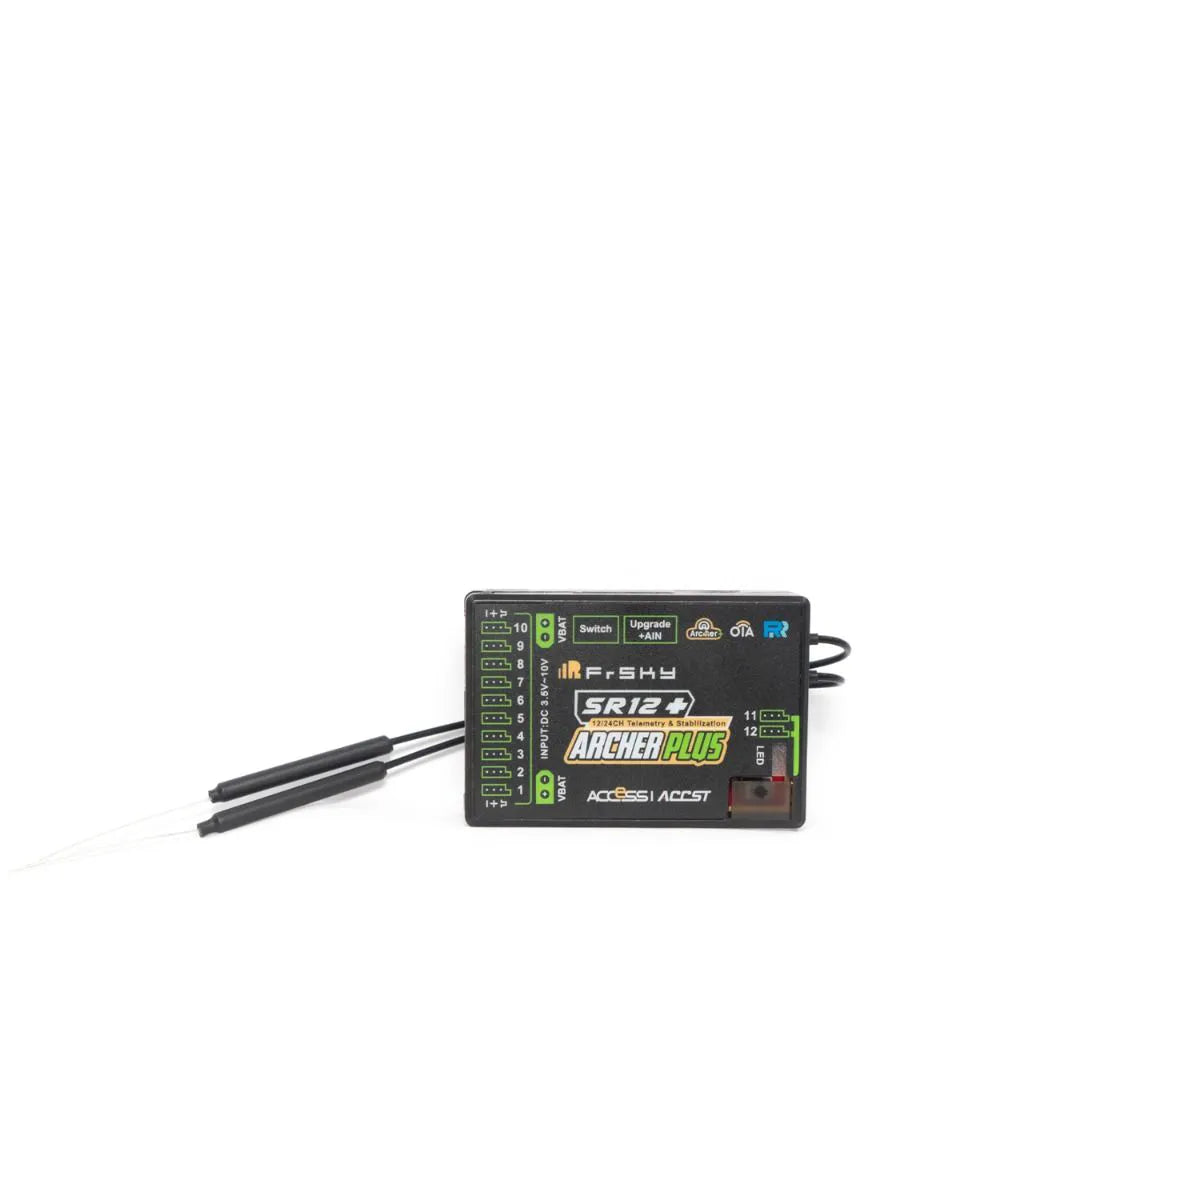 FrSky ARCHER PLUS SR12+ Receiver - 2.4Ghz ACCESS ACCST D16 Mode Built-in 3-Axis Gyroscope 12 Channel Receiver